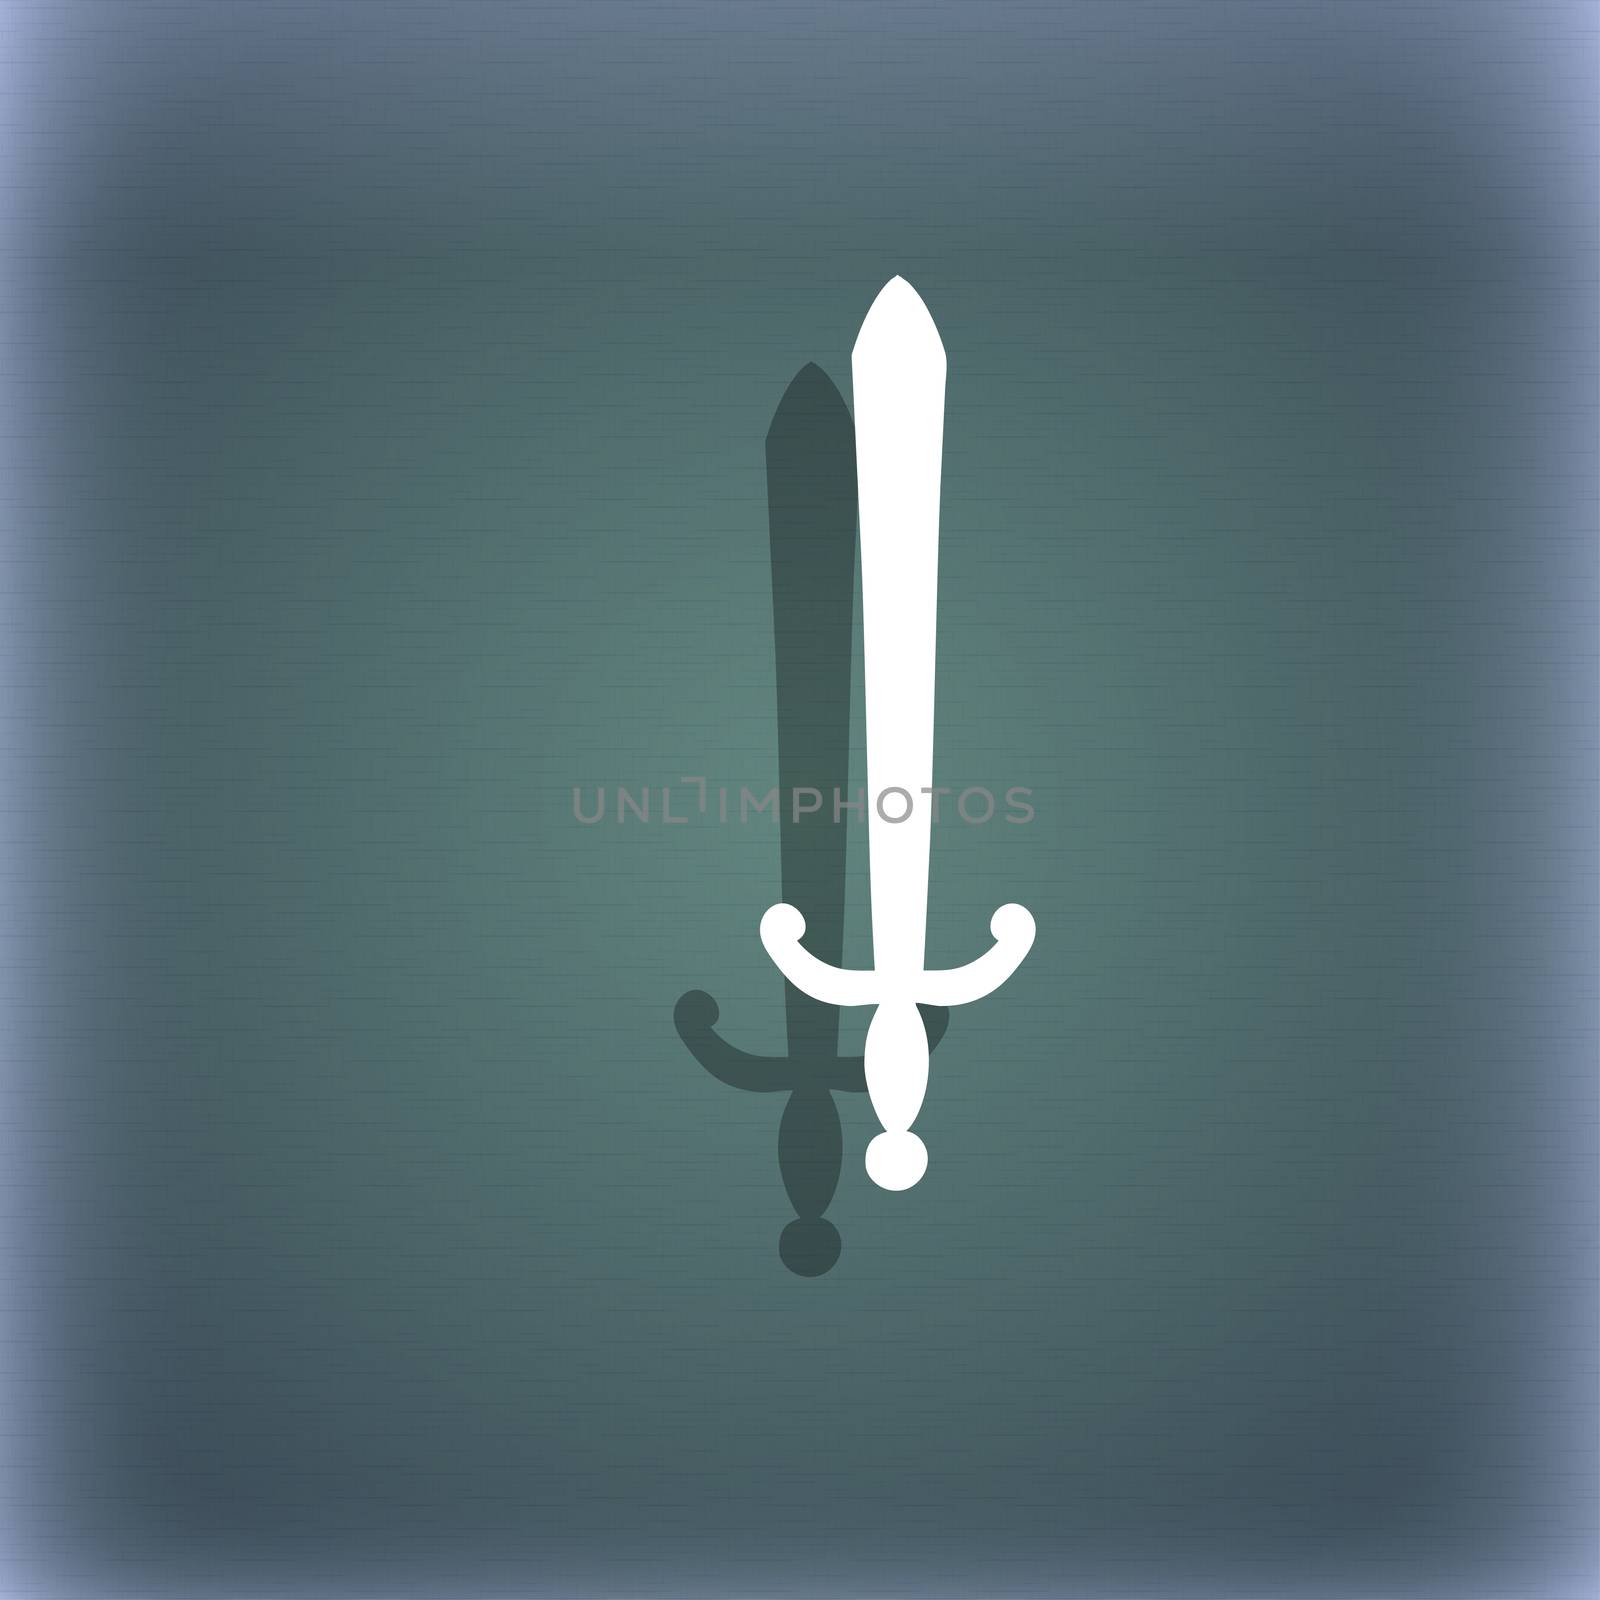 the sword icon symbol on the blue-green abstract background with shadow and space for your text.  by serhii_lohvyniuk